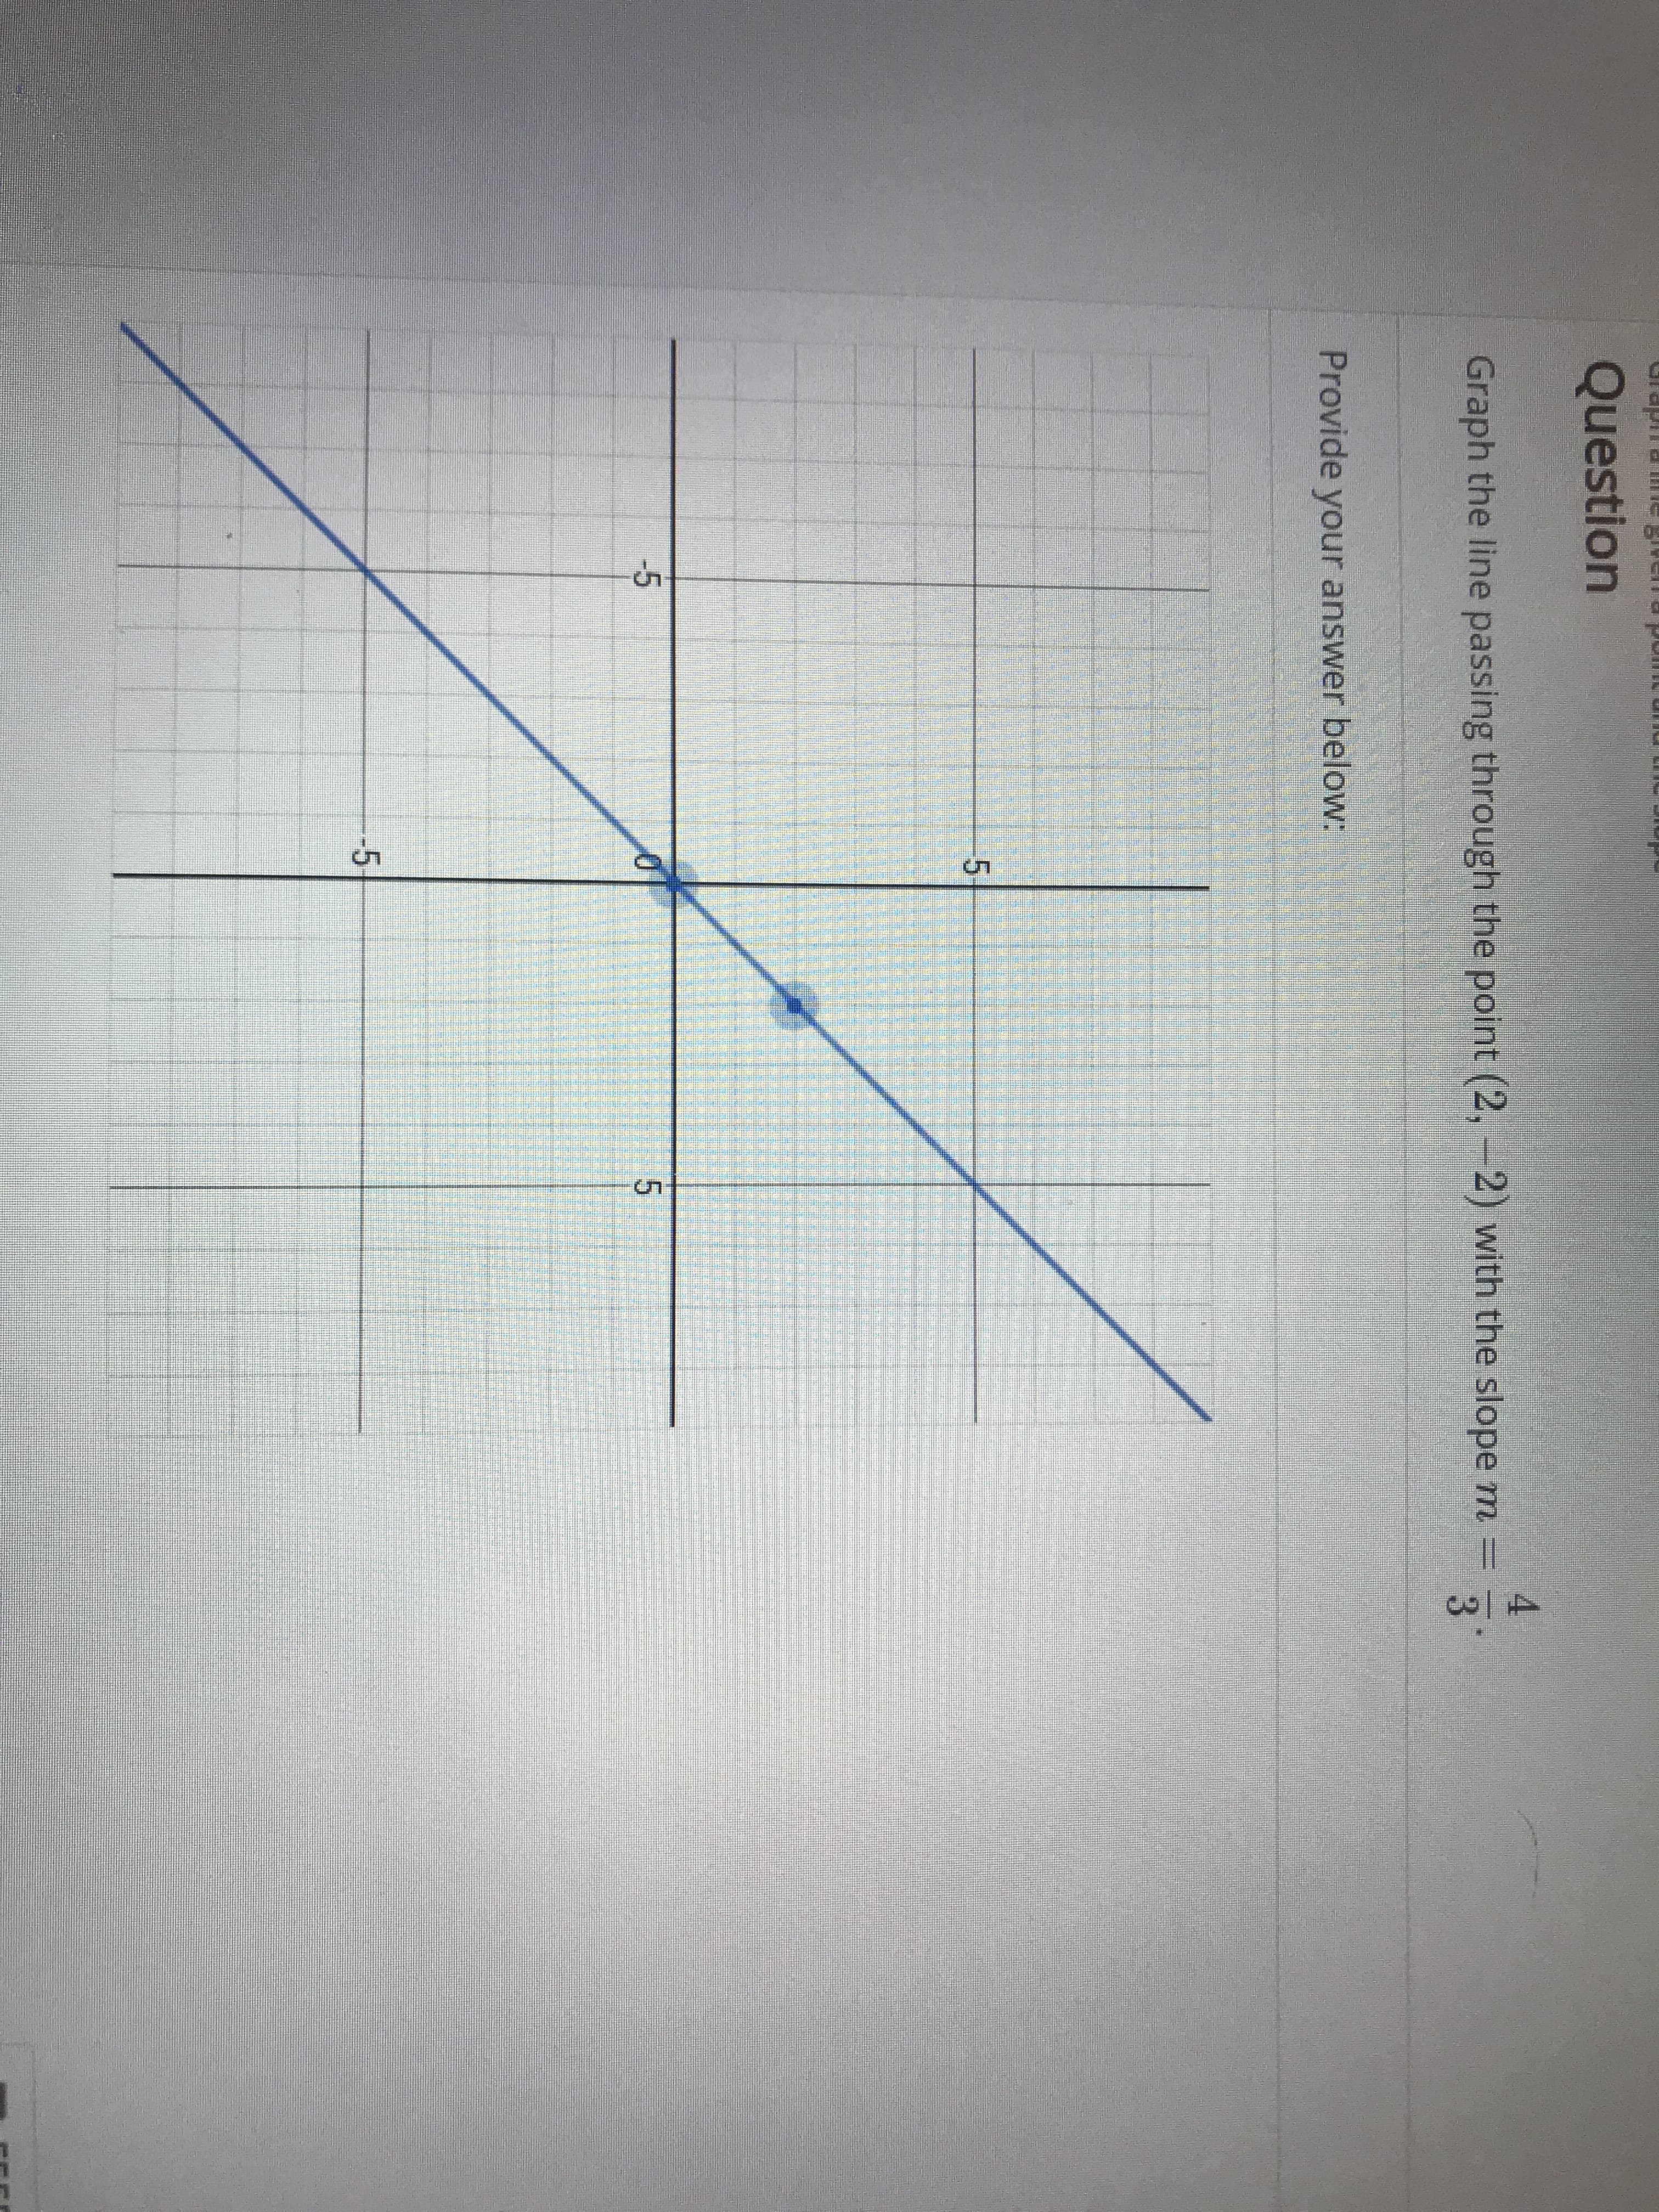 Question
4
Graph the line passing through the point (2, -2) with the slope m -
3
Provide your answer below:
/
5
-5
5
-5
